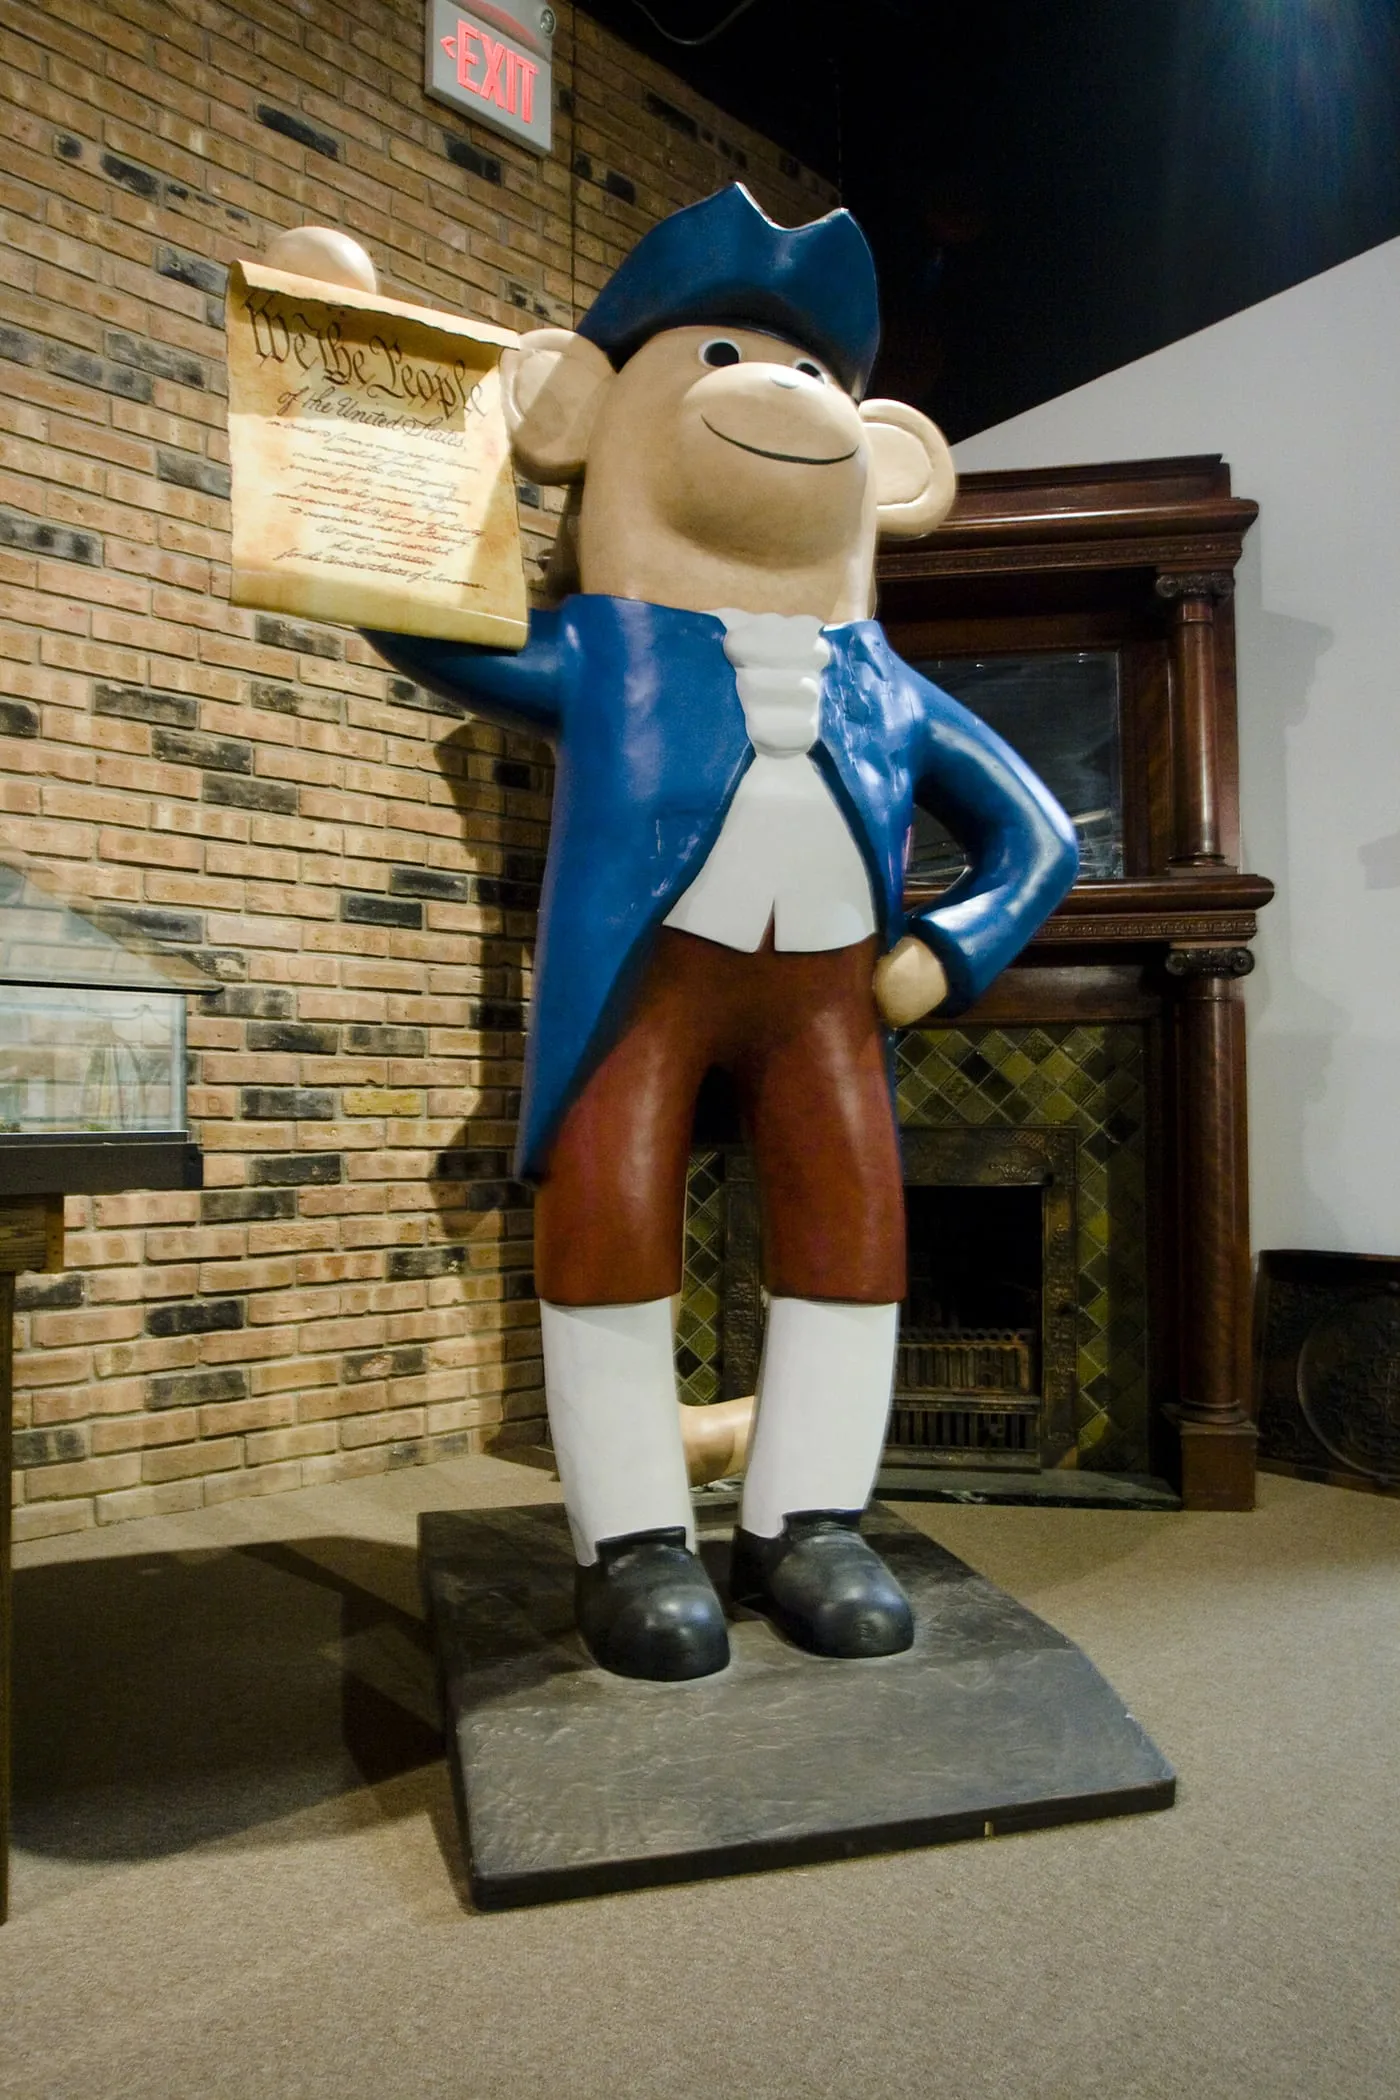 Sock Monkey Museum at Midway Village in Rockford, Illinois